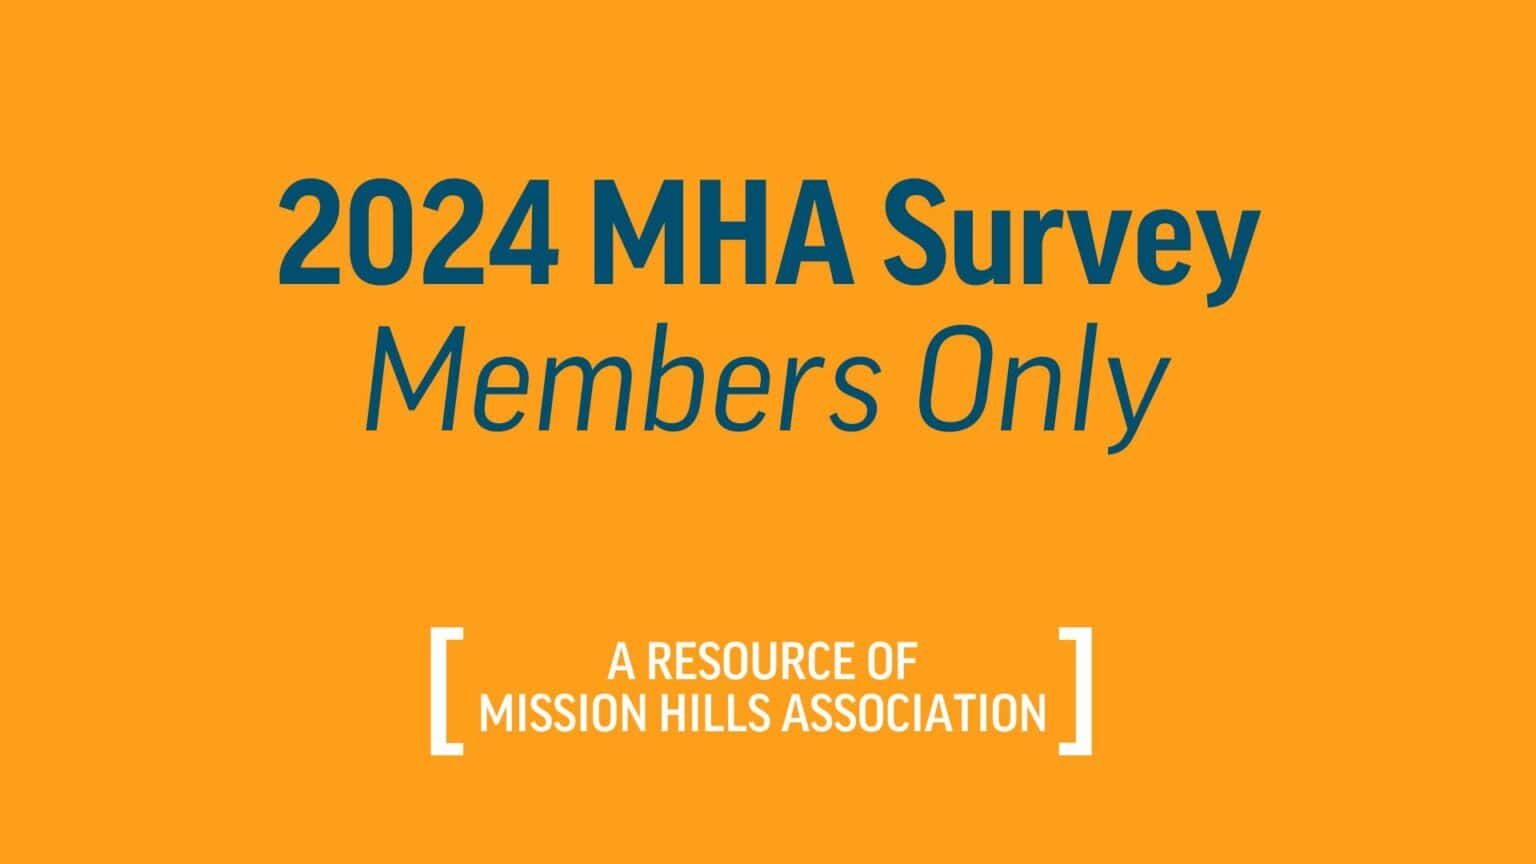 2024 Mission Hills Association Survey | Members Only